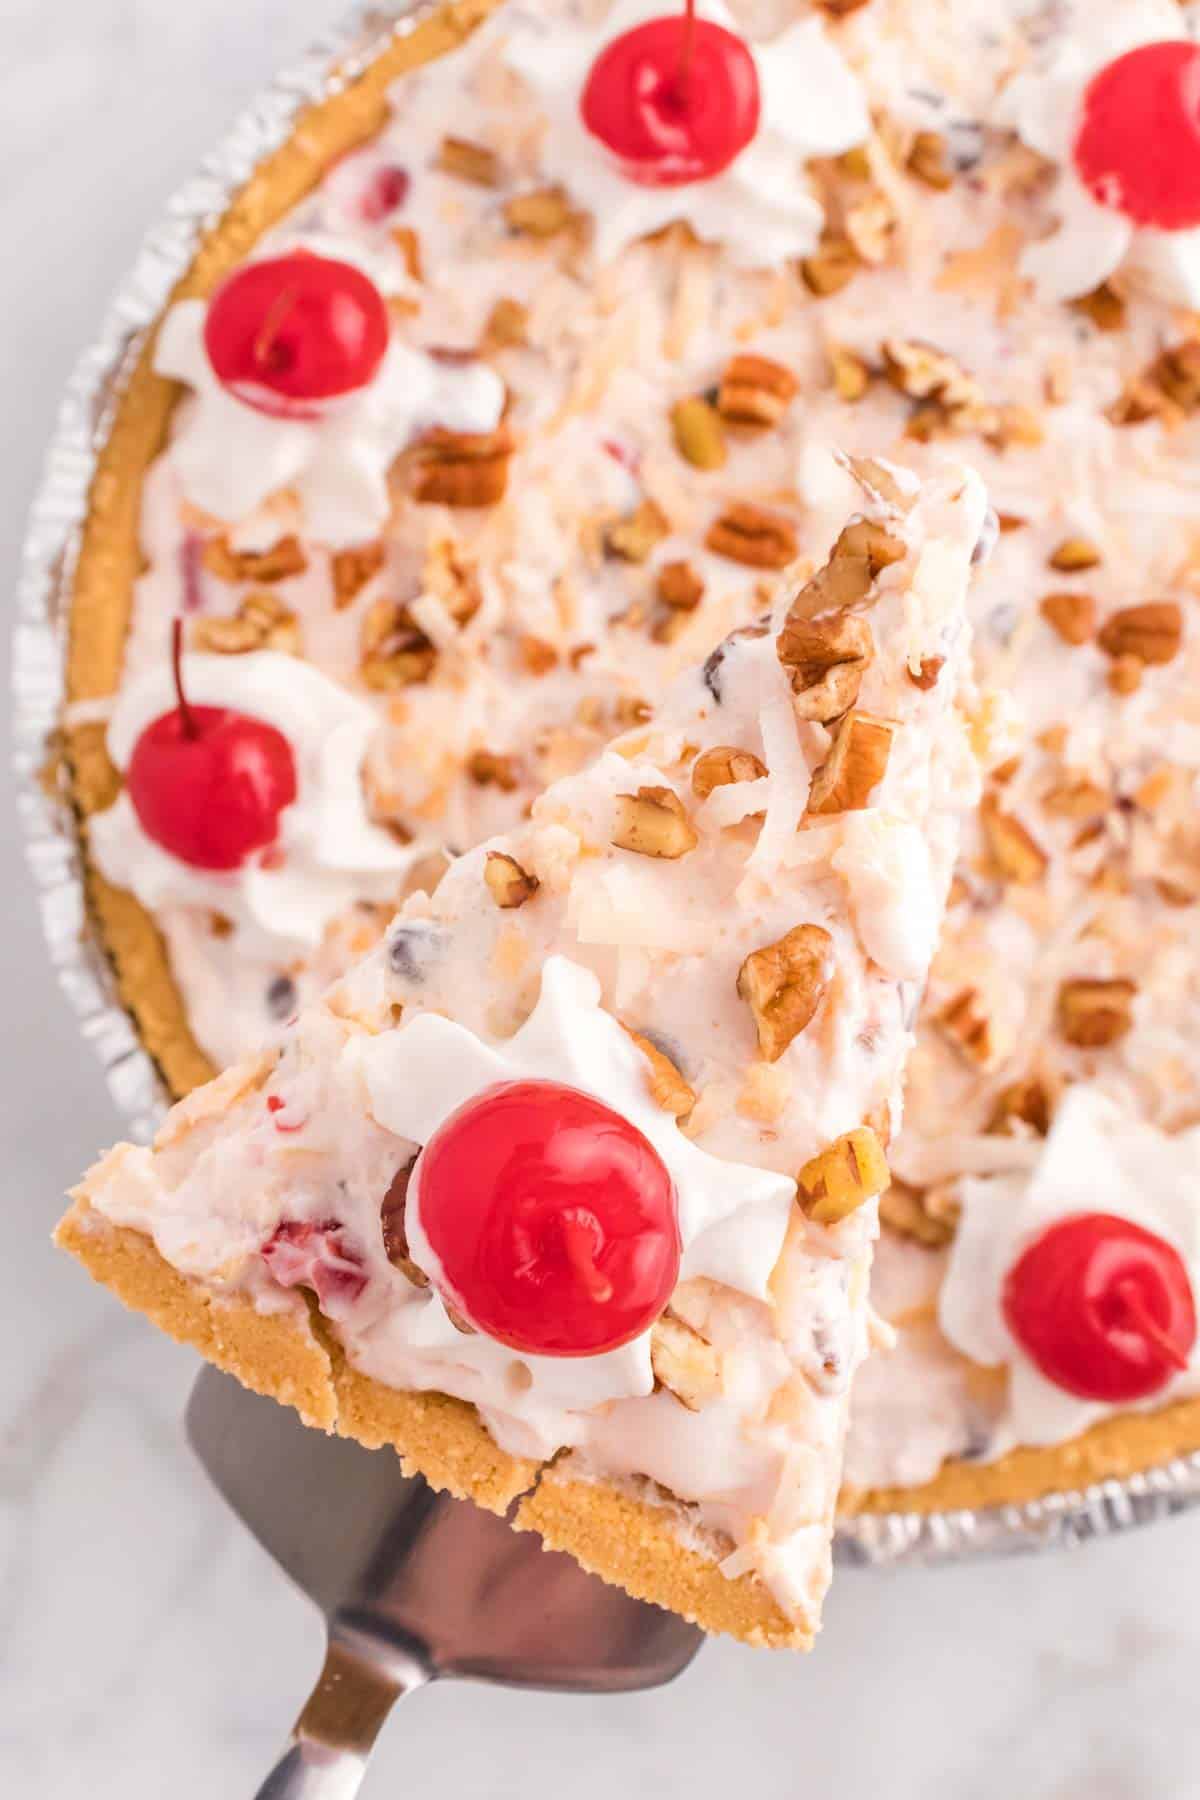 Million Dollar Pie is a creamy no bake pie loaded with crushed pineapple, chopped pecans, toasted coconut, maraschino cherries, mini marshmallows and chocolate chips all in a graham cracker crust.